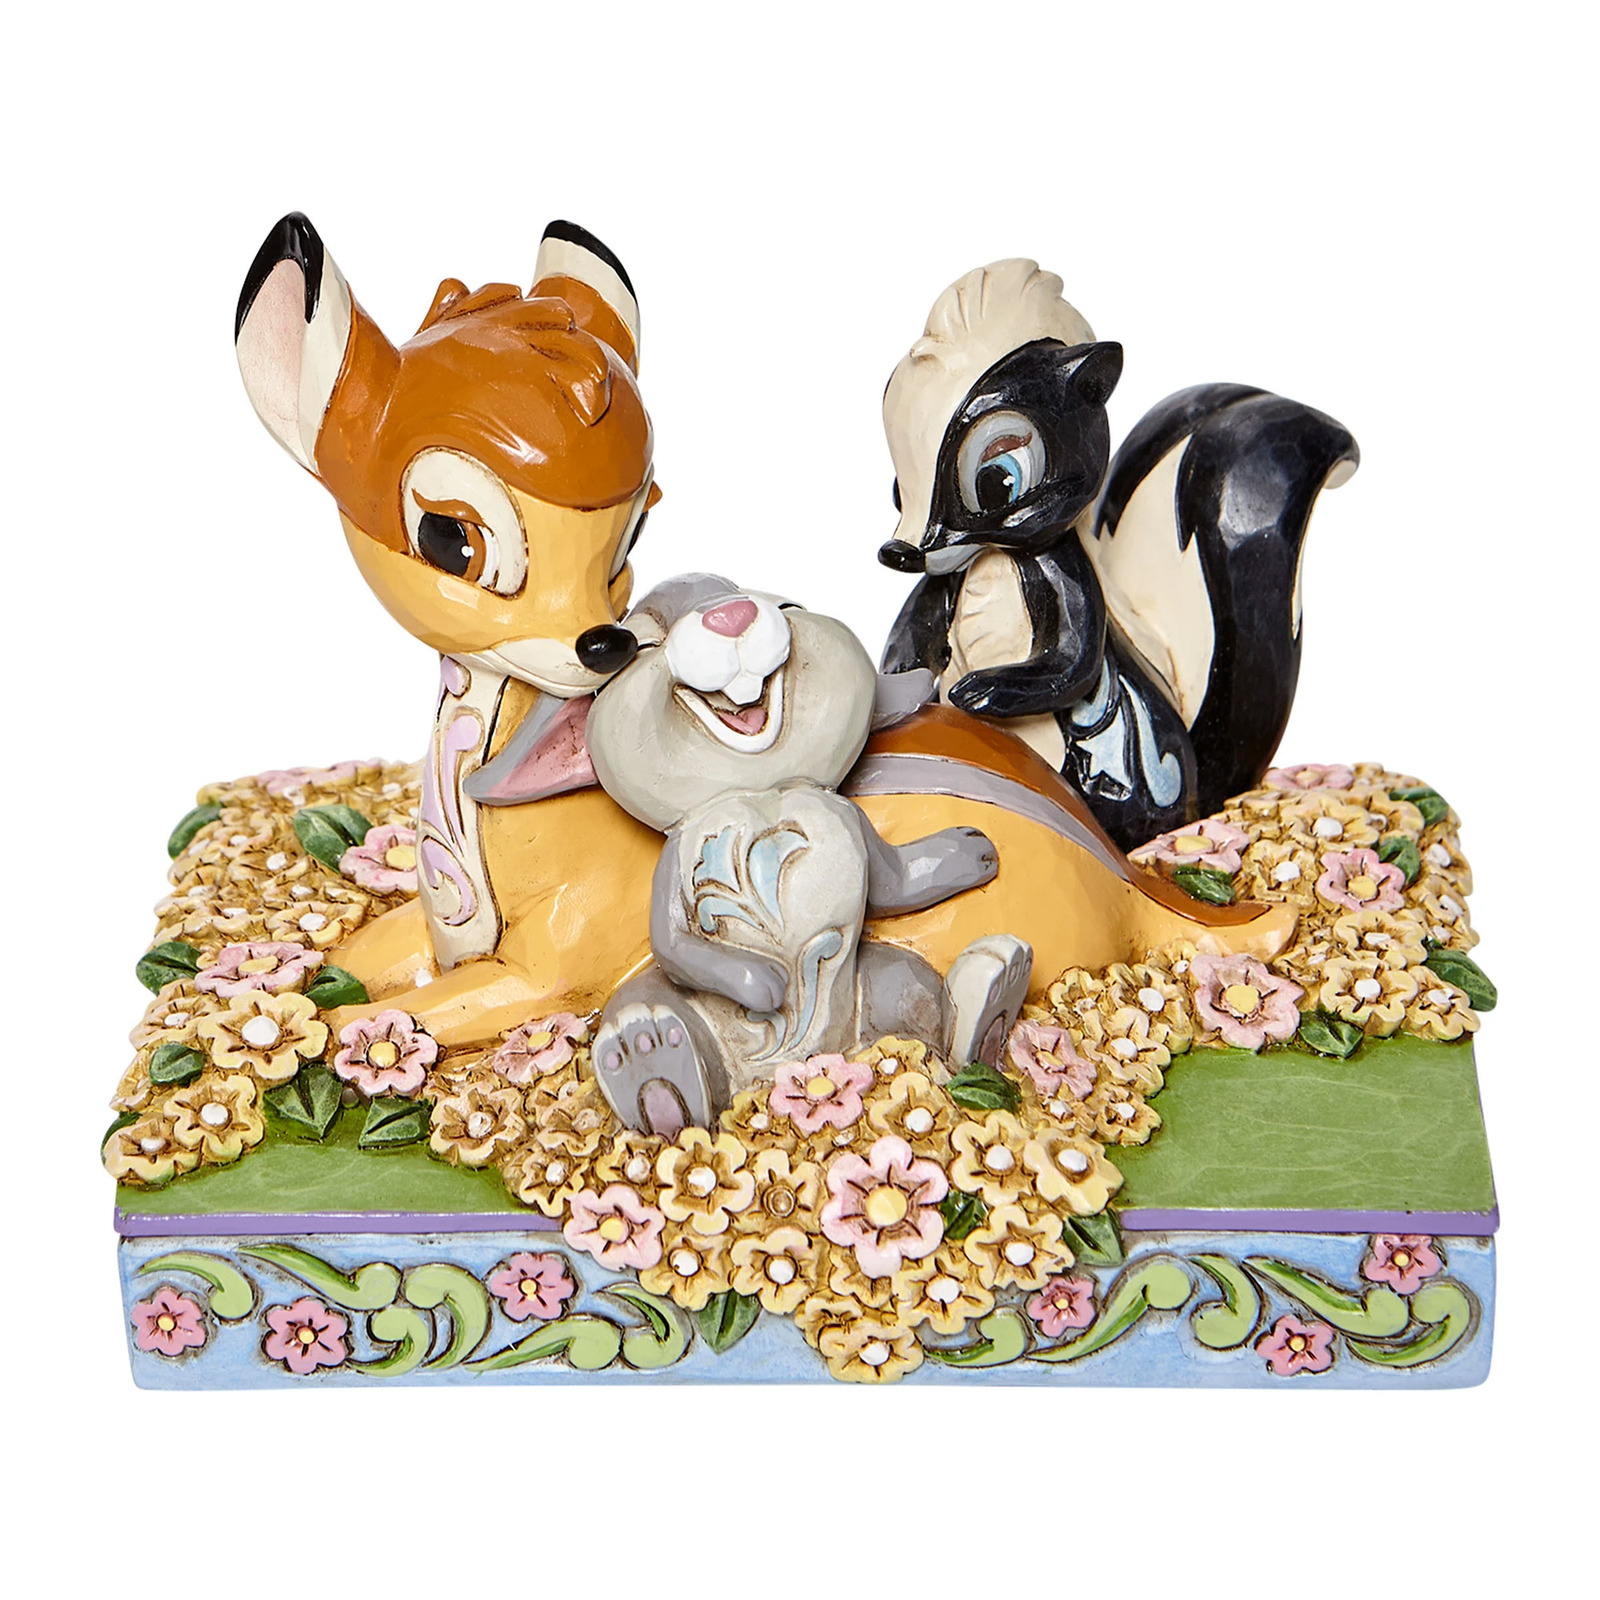 Jim Shore Bambi and Friends in Flowers 6008318 Disney Traditions - NEW IN BOX